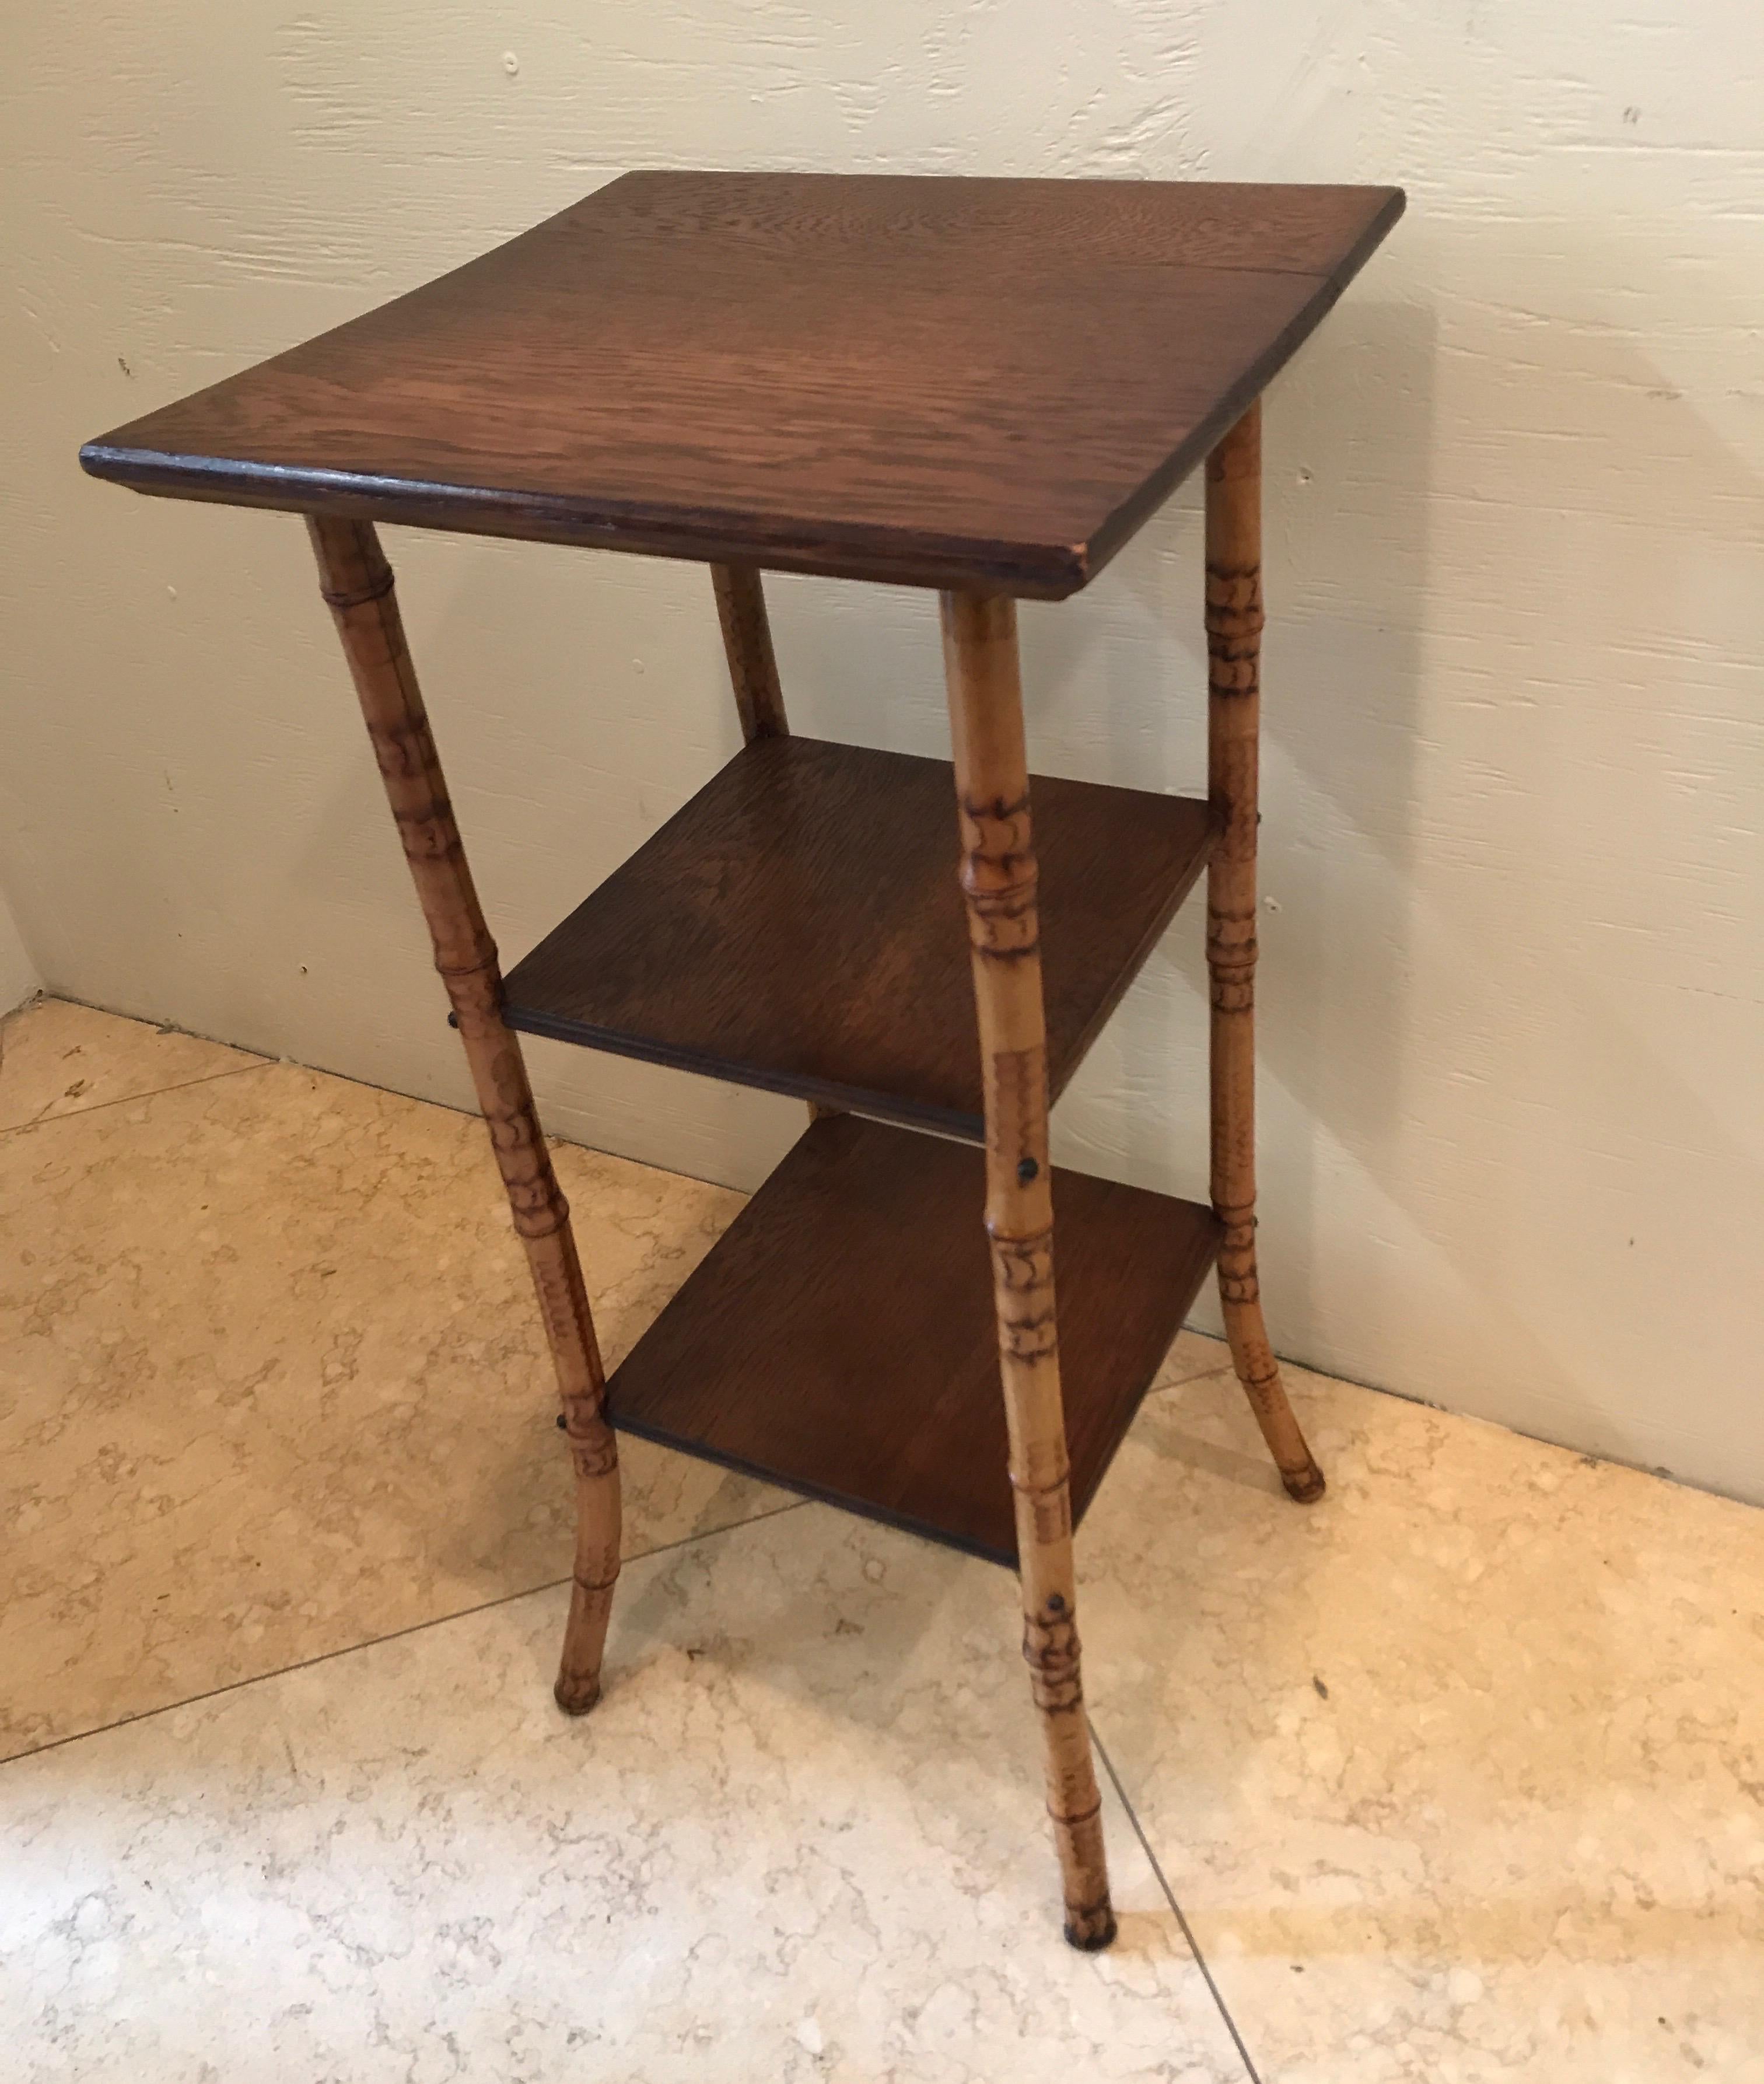 Antique bamboo stand with three wood shelves.